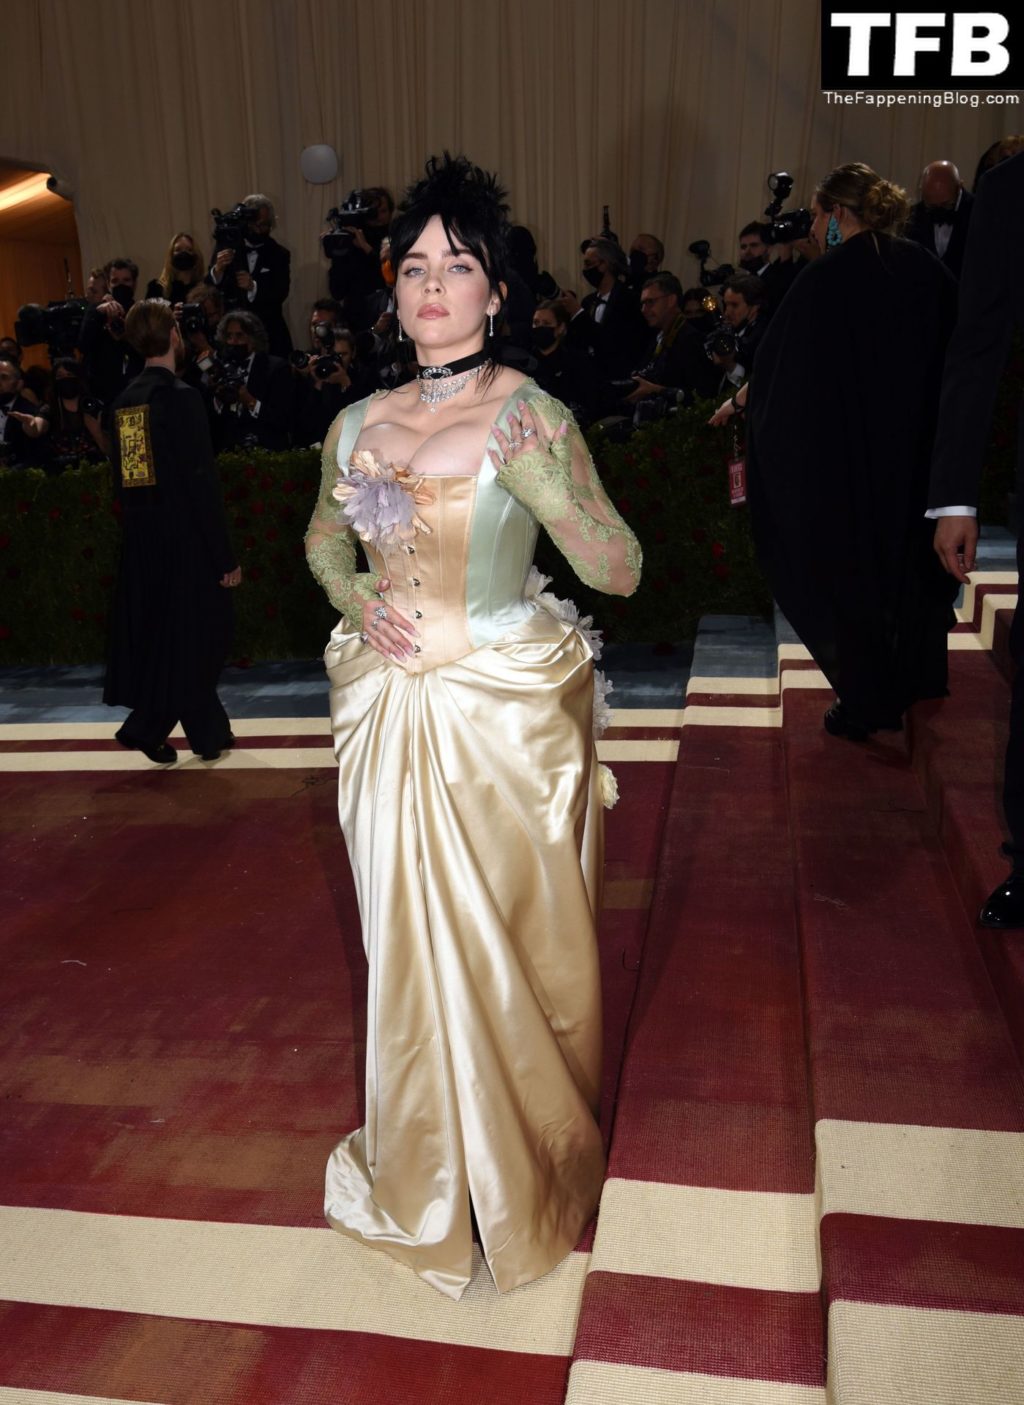 Billie Eilish Sexy The Fappening Blog 122 1024x1405 - Billie Eilish Showcases Nice Cleavage at The 2022 Met Gala in NYC (155 Photos)